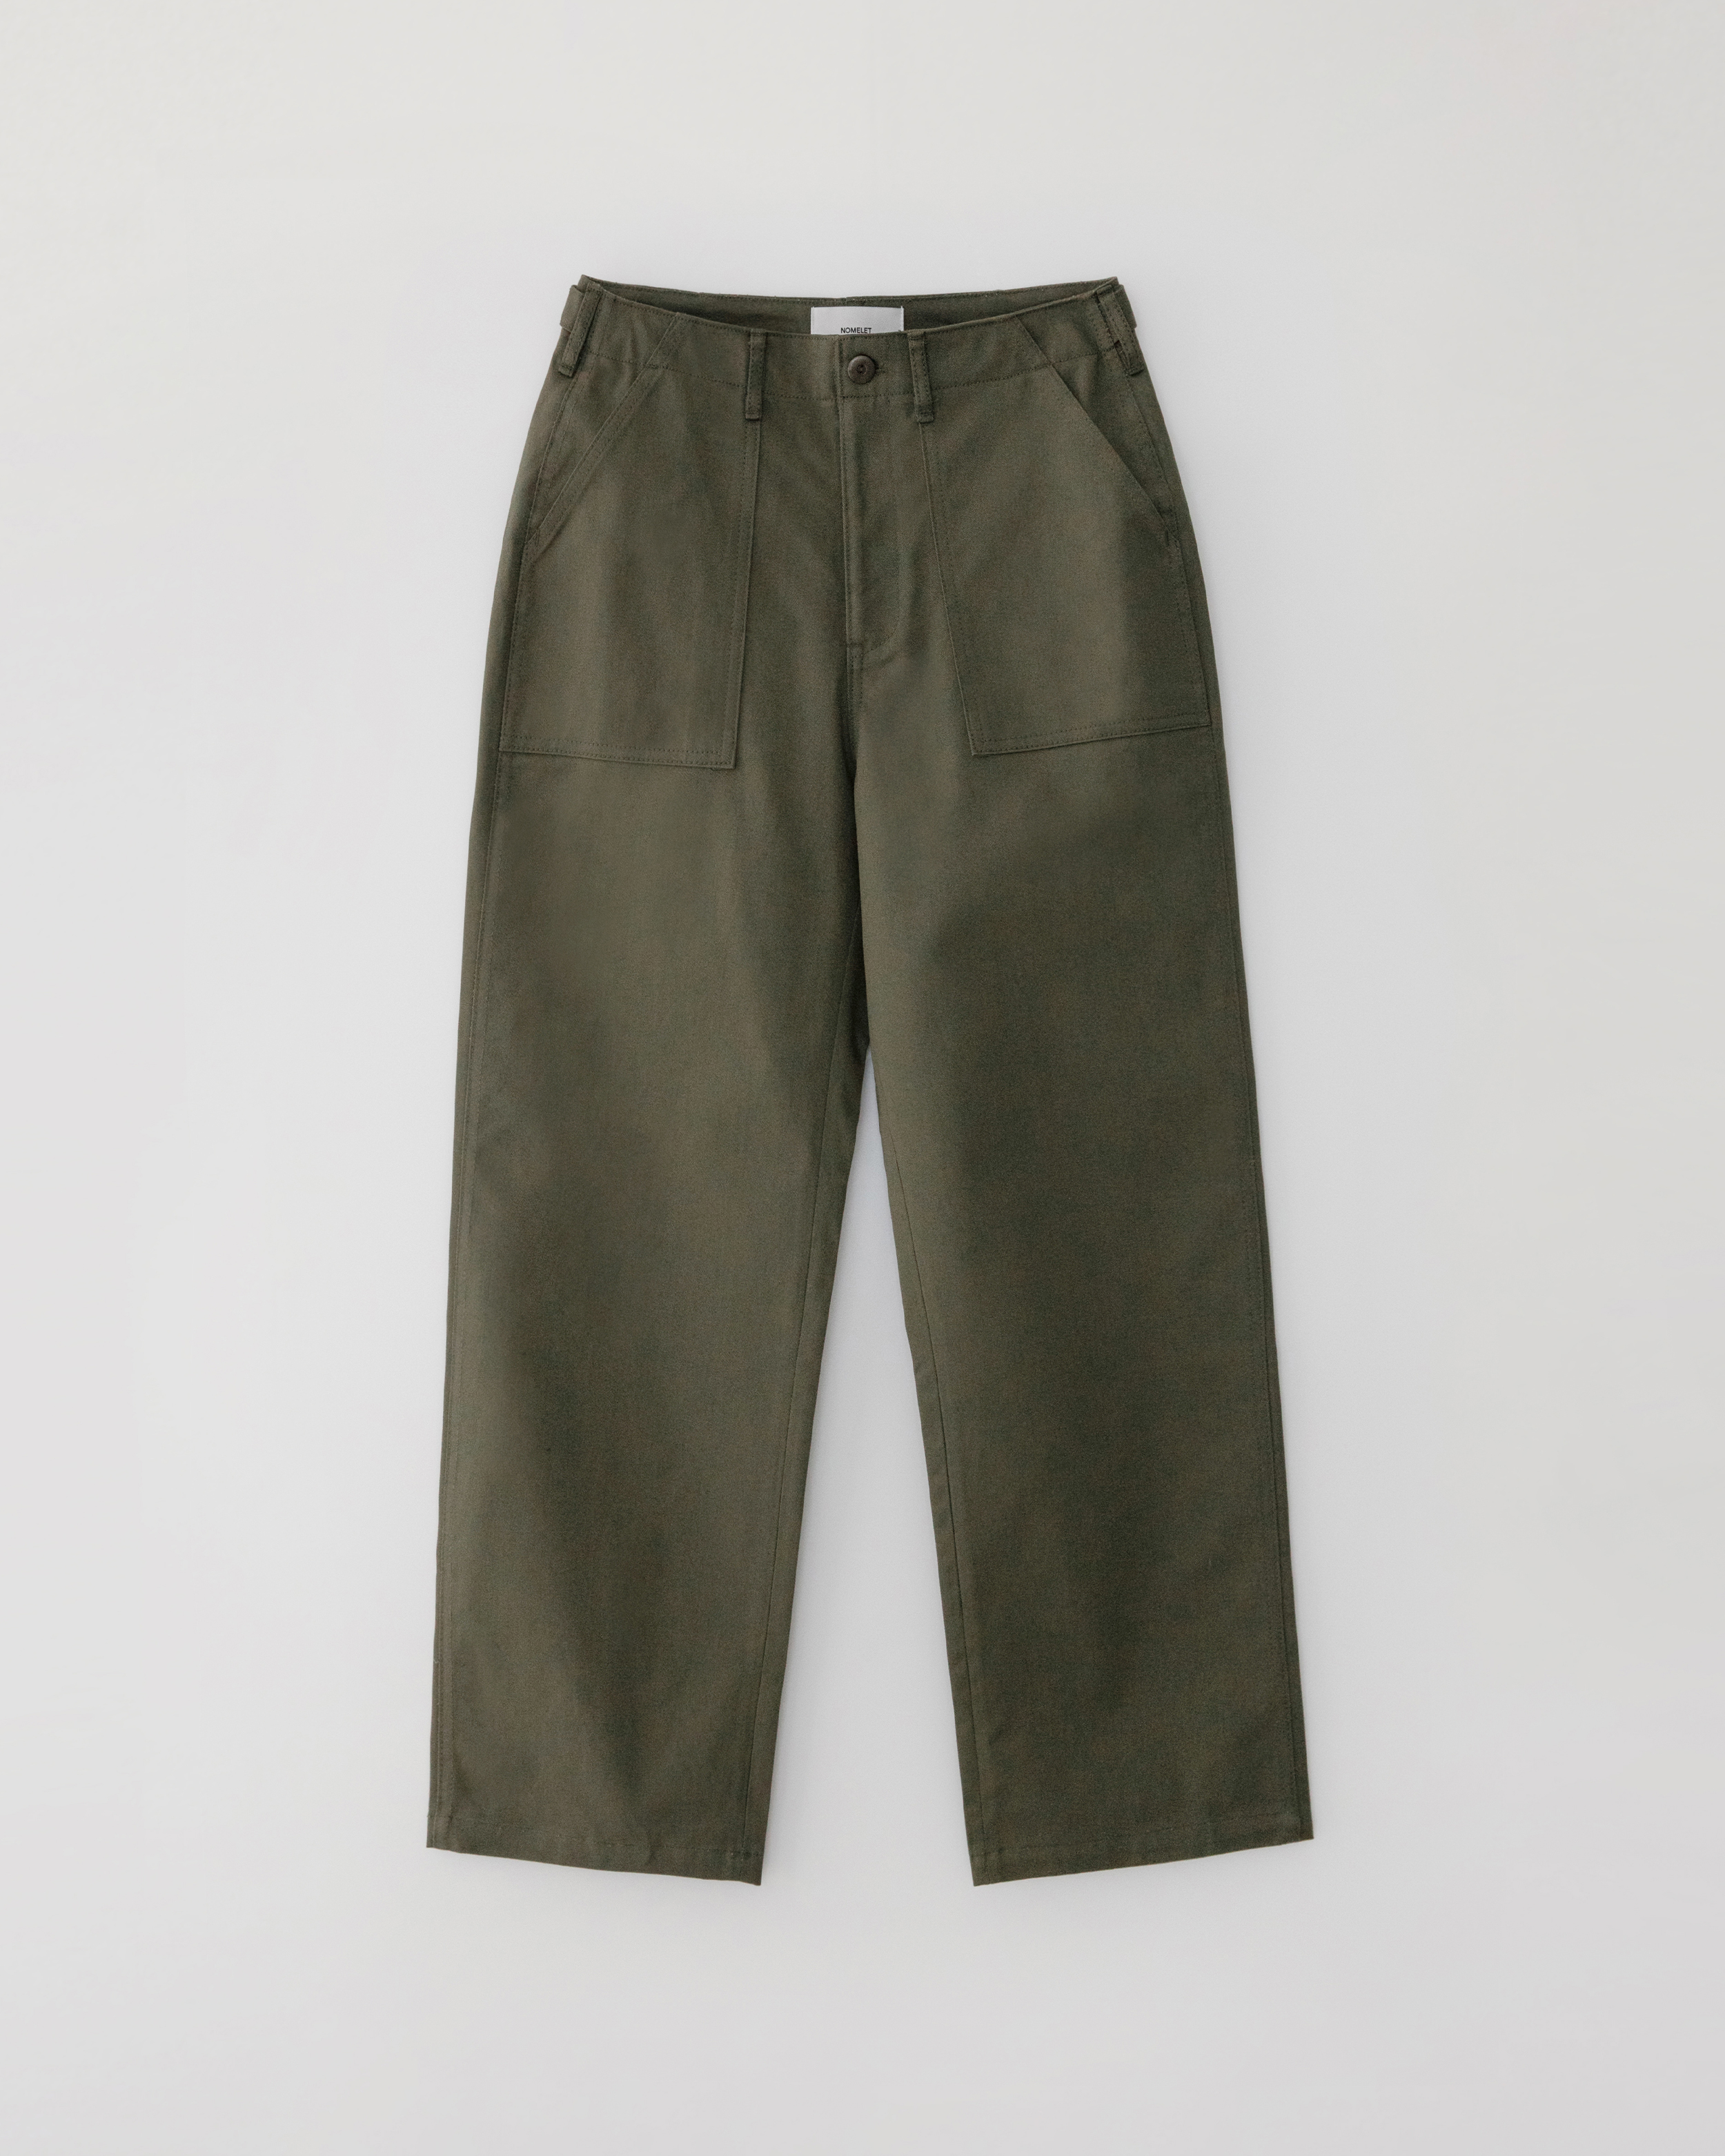 Roden work pants - forest